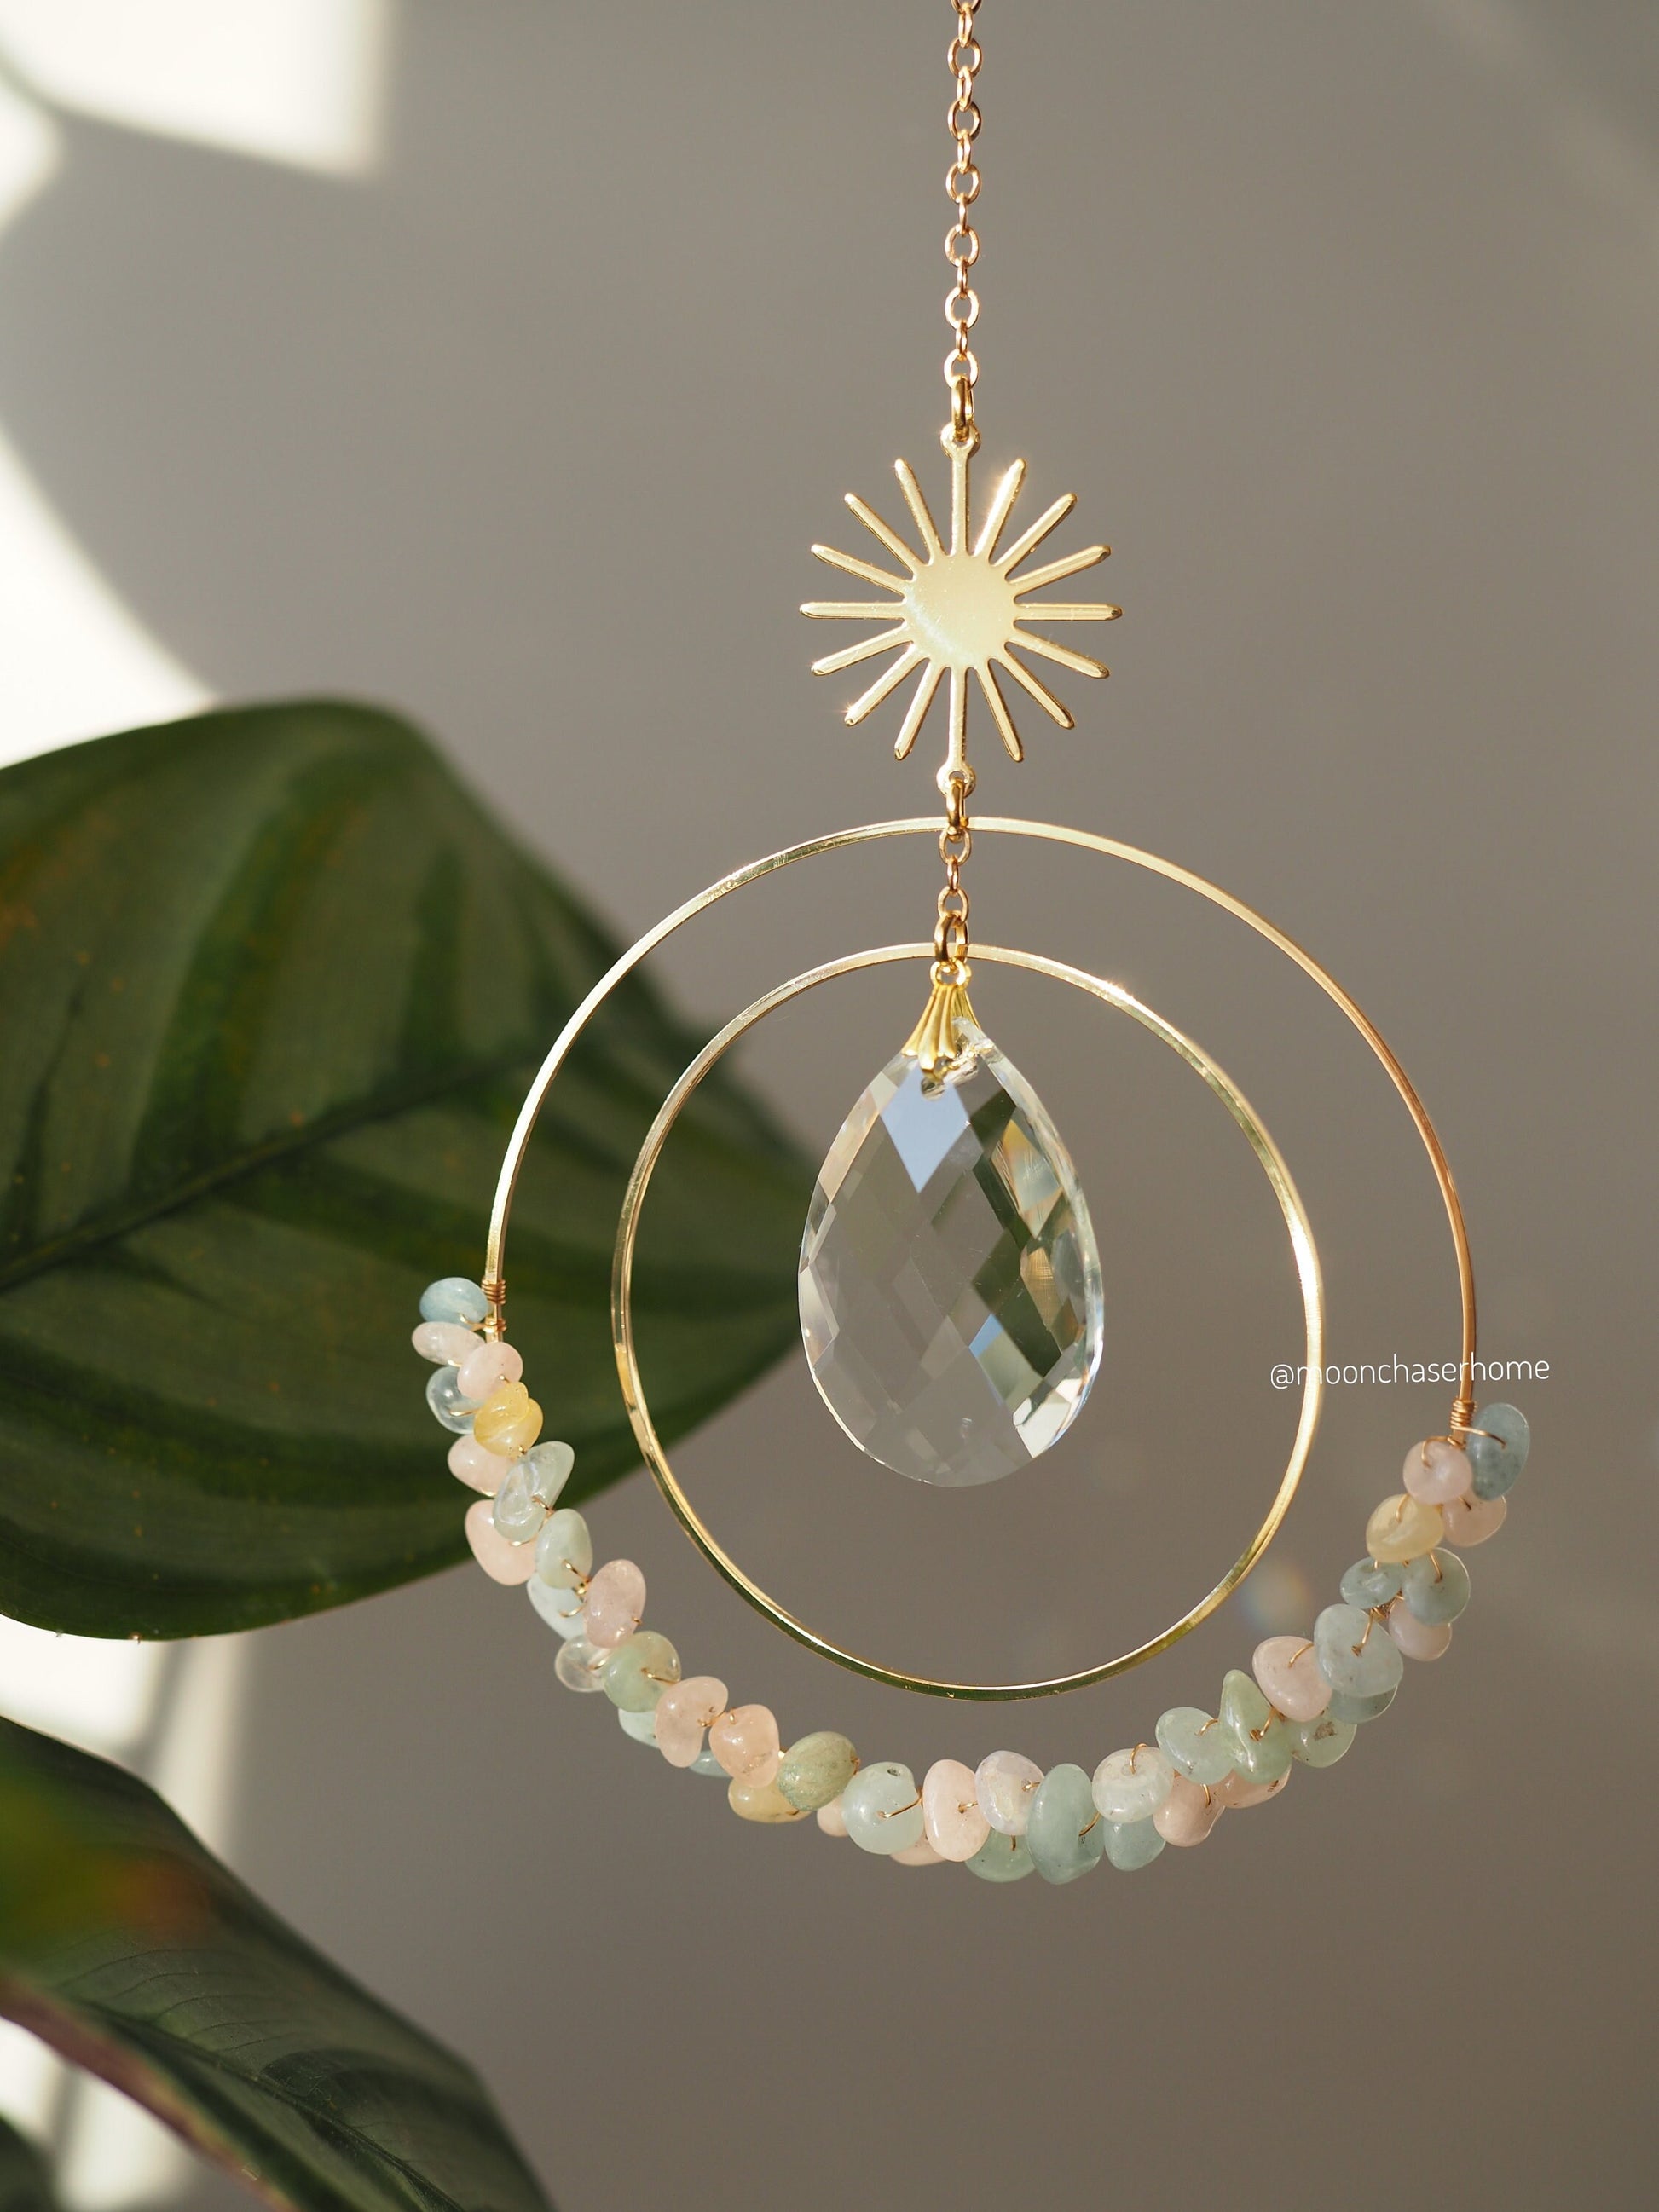 Aziza suncatcher with gold plated SUN and glass beads, crystal car charm, rainbow prism, light diffuser,boho home decoration, gift idea for